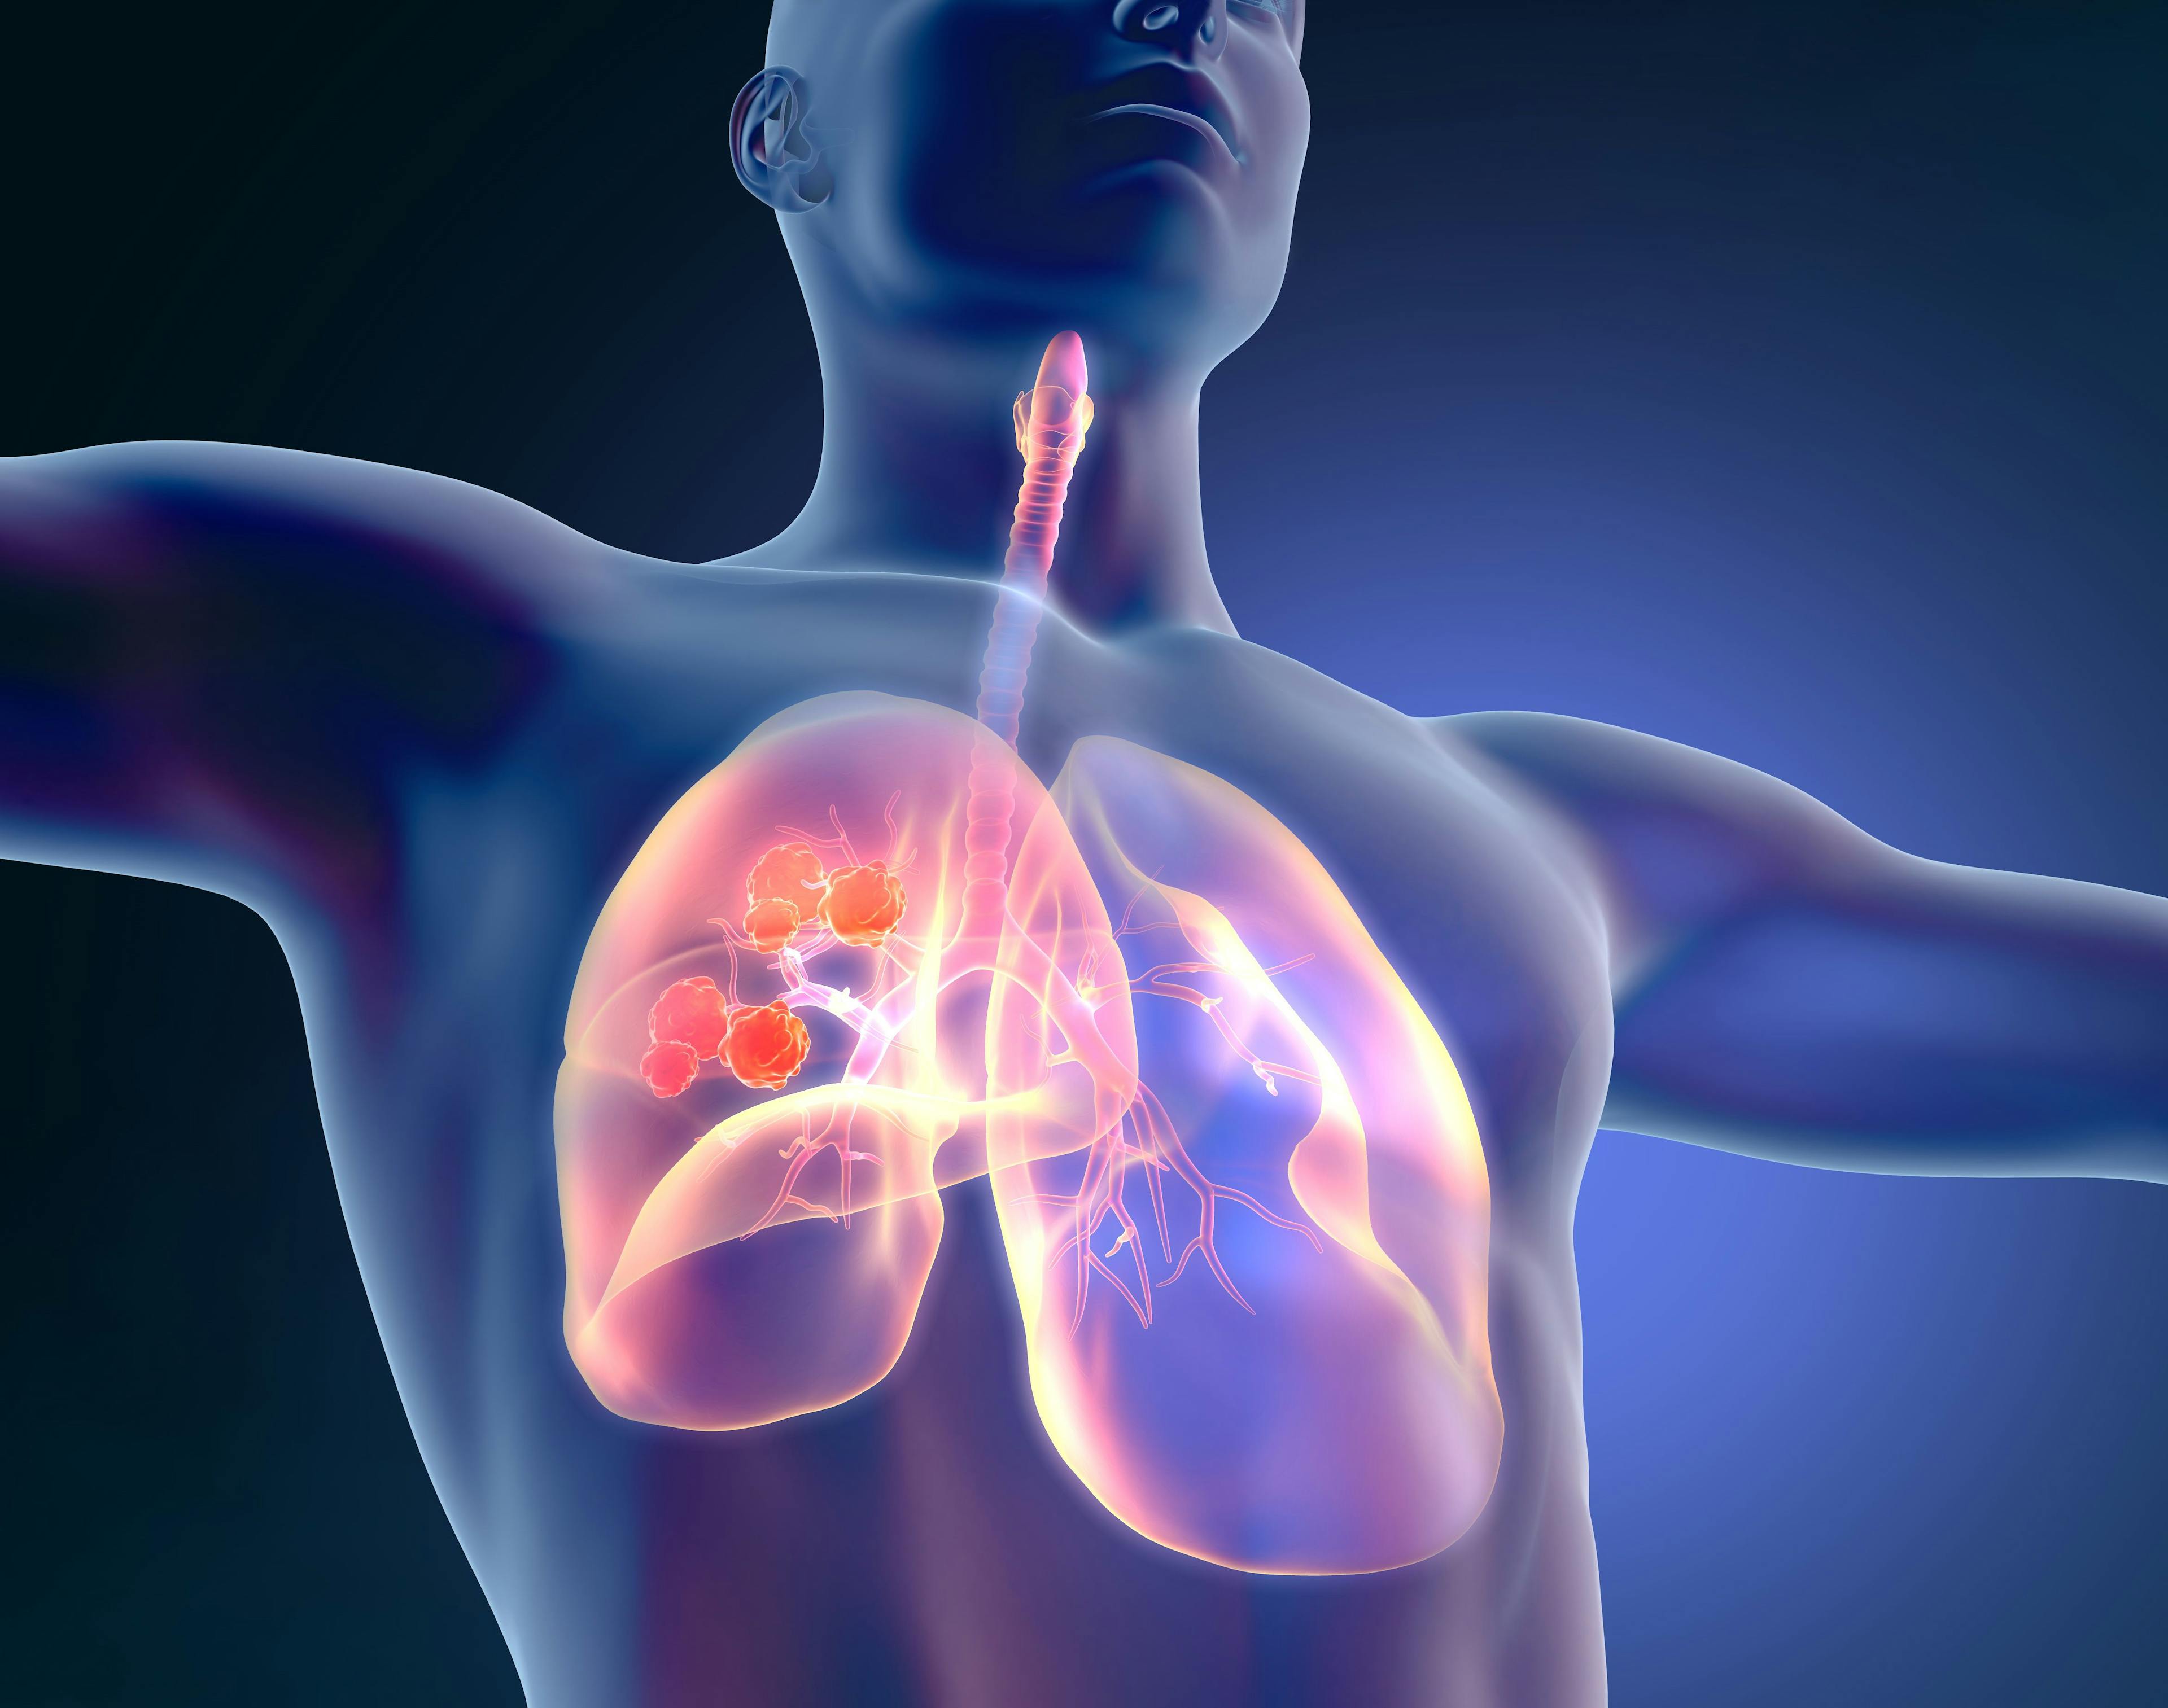 FDA Grants Fast Track Designation for Reqorsa in Combination with Keytruda for NSCLC